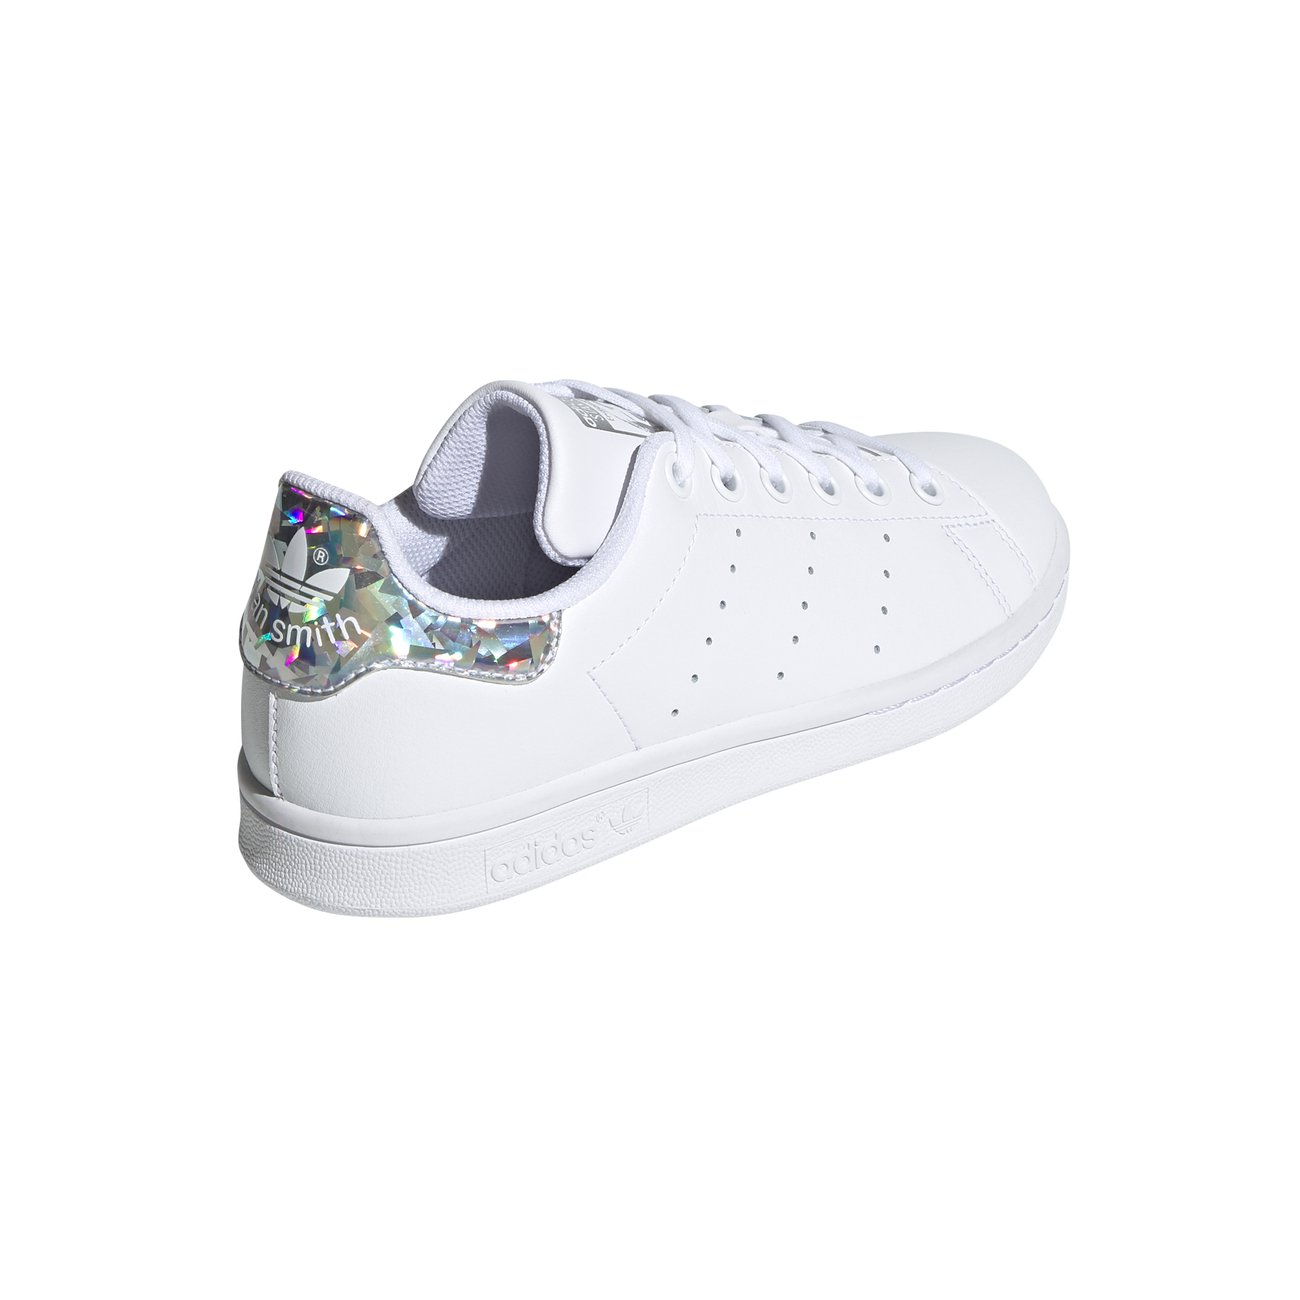 sneakers femme adidas stan smith